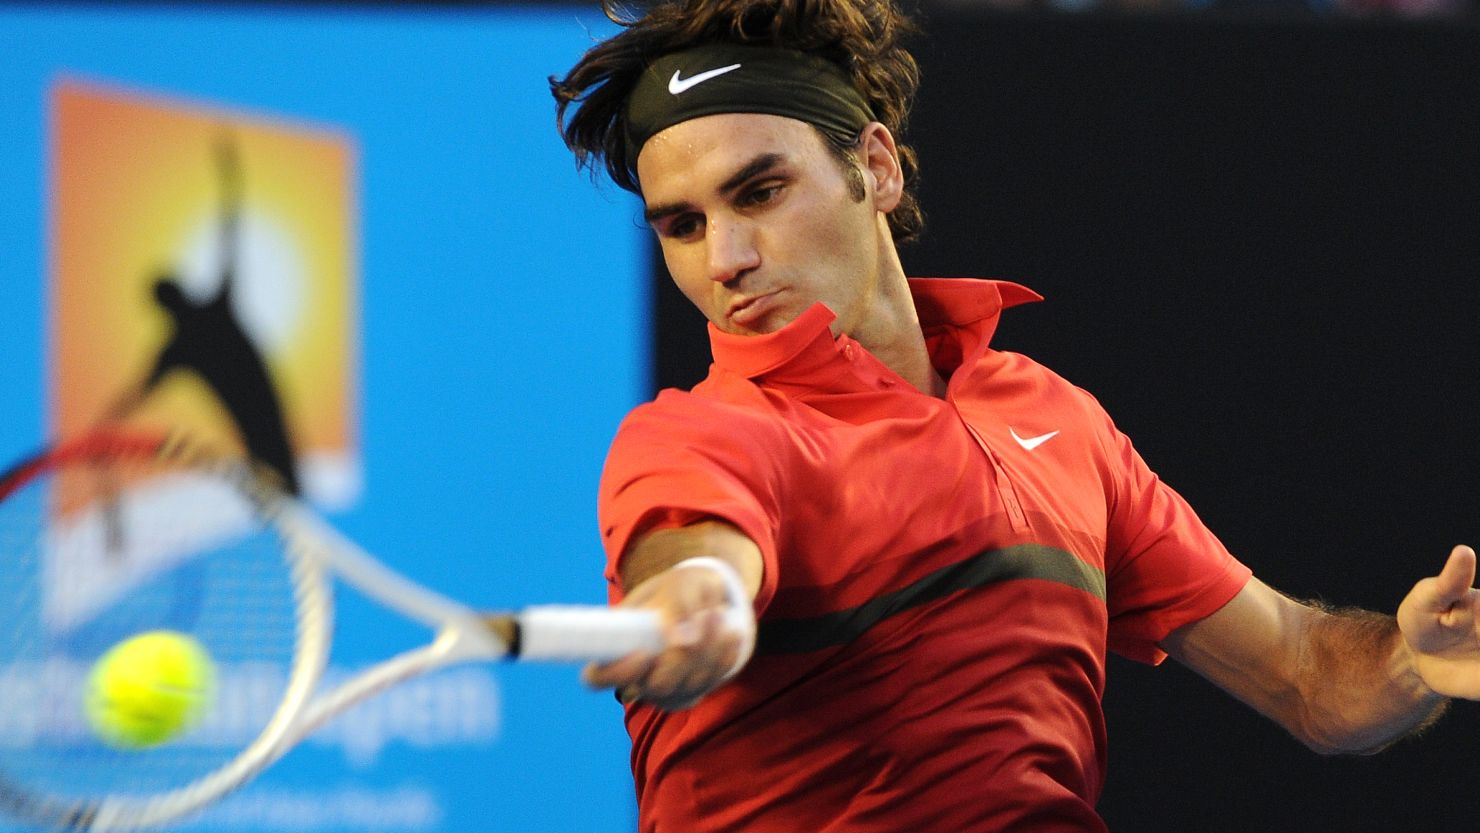 Roger Federer had few problems in beating Alexander Kudryavtsev in his opening match at the Australian Open on Monday.